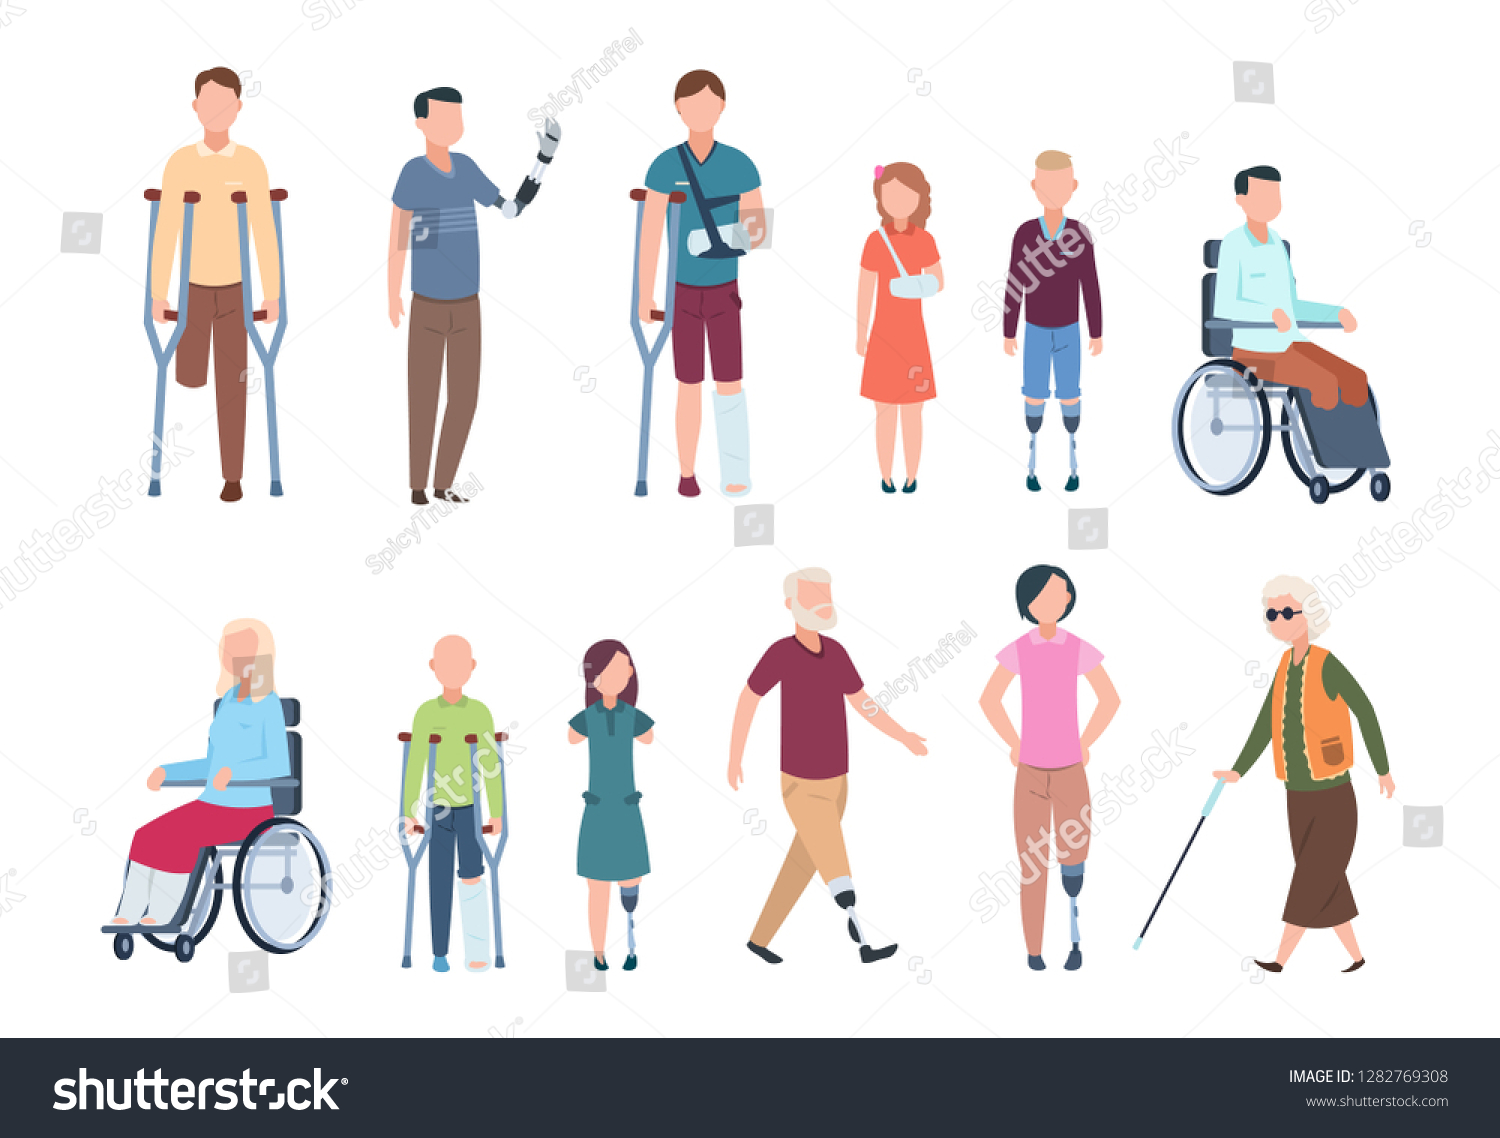 SVG of Disabled persons. Diverse injured people in wheelchair, elderly, adult and children patients. Handicapped characters vector set svg